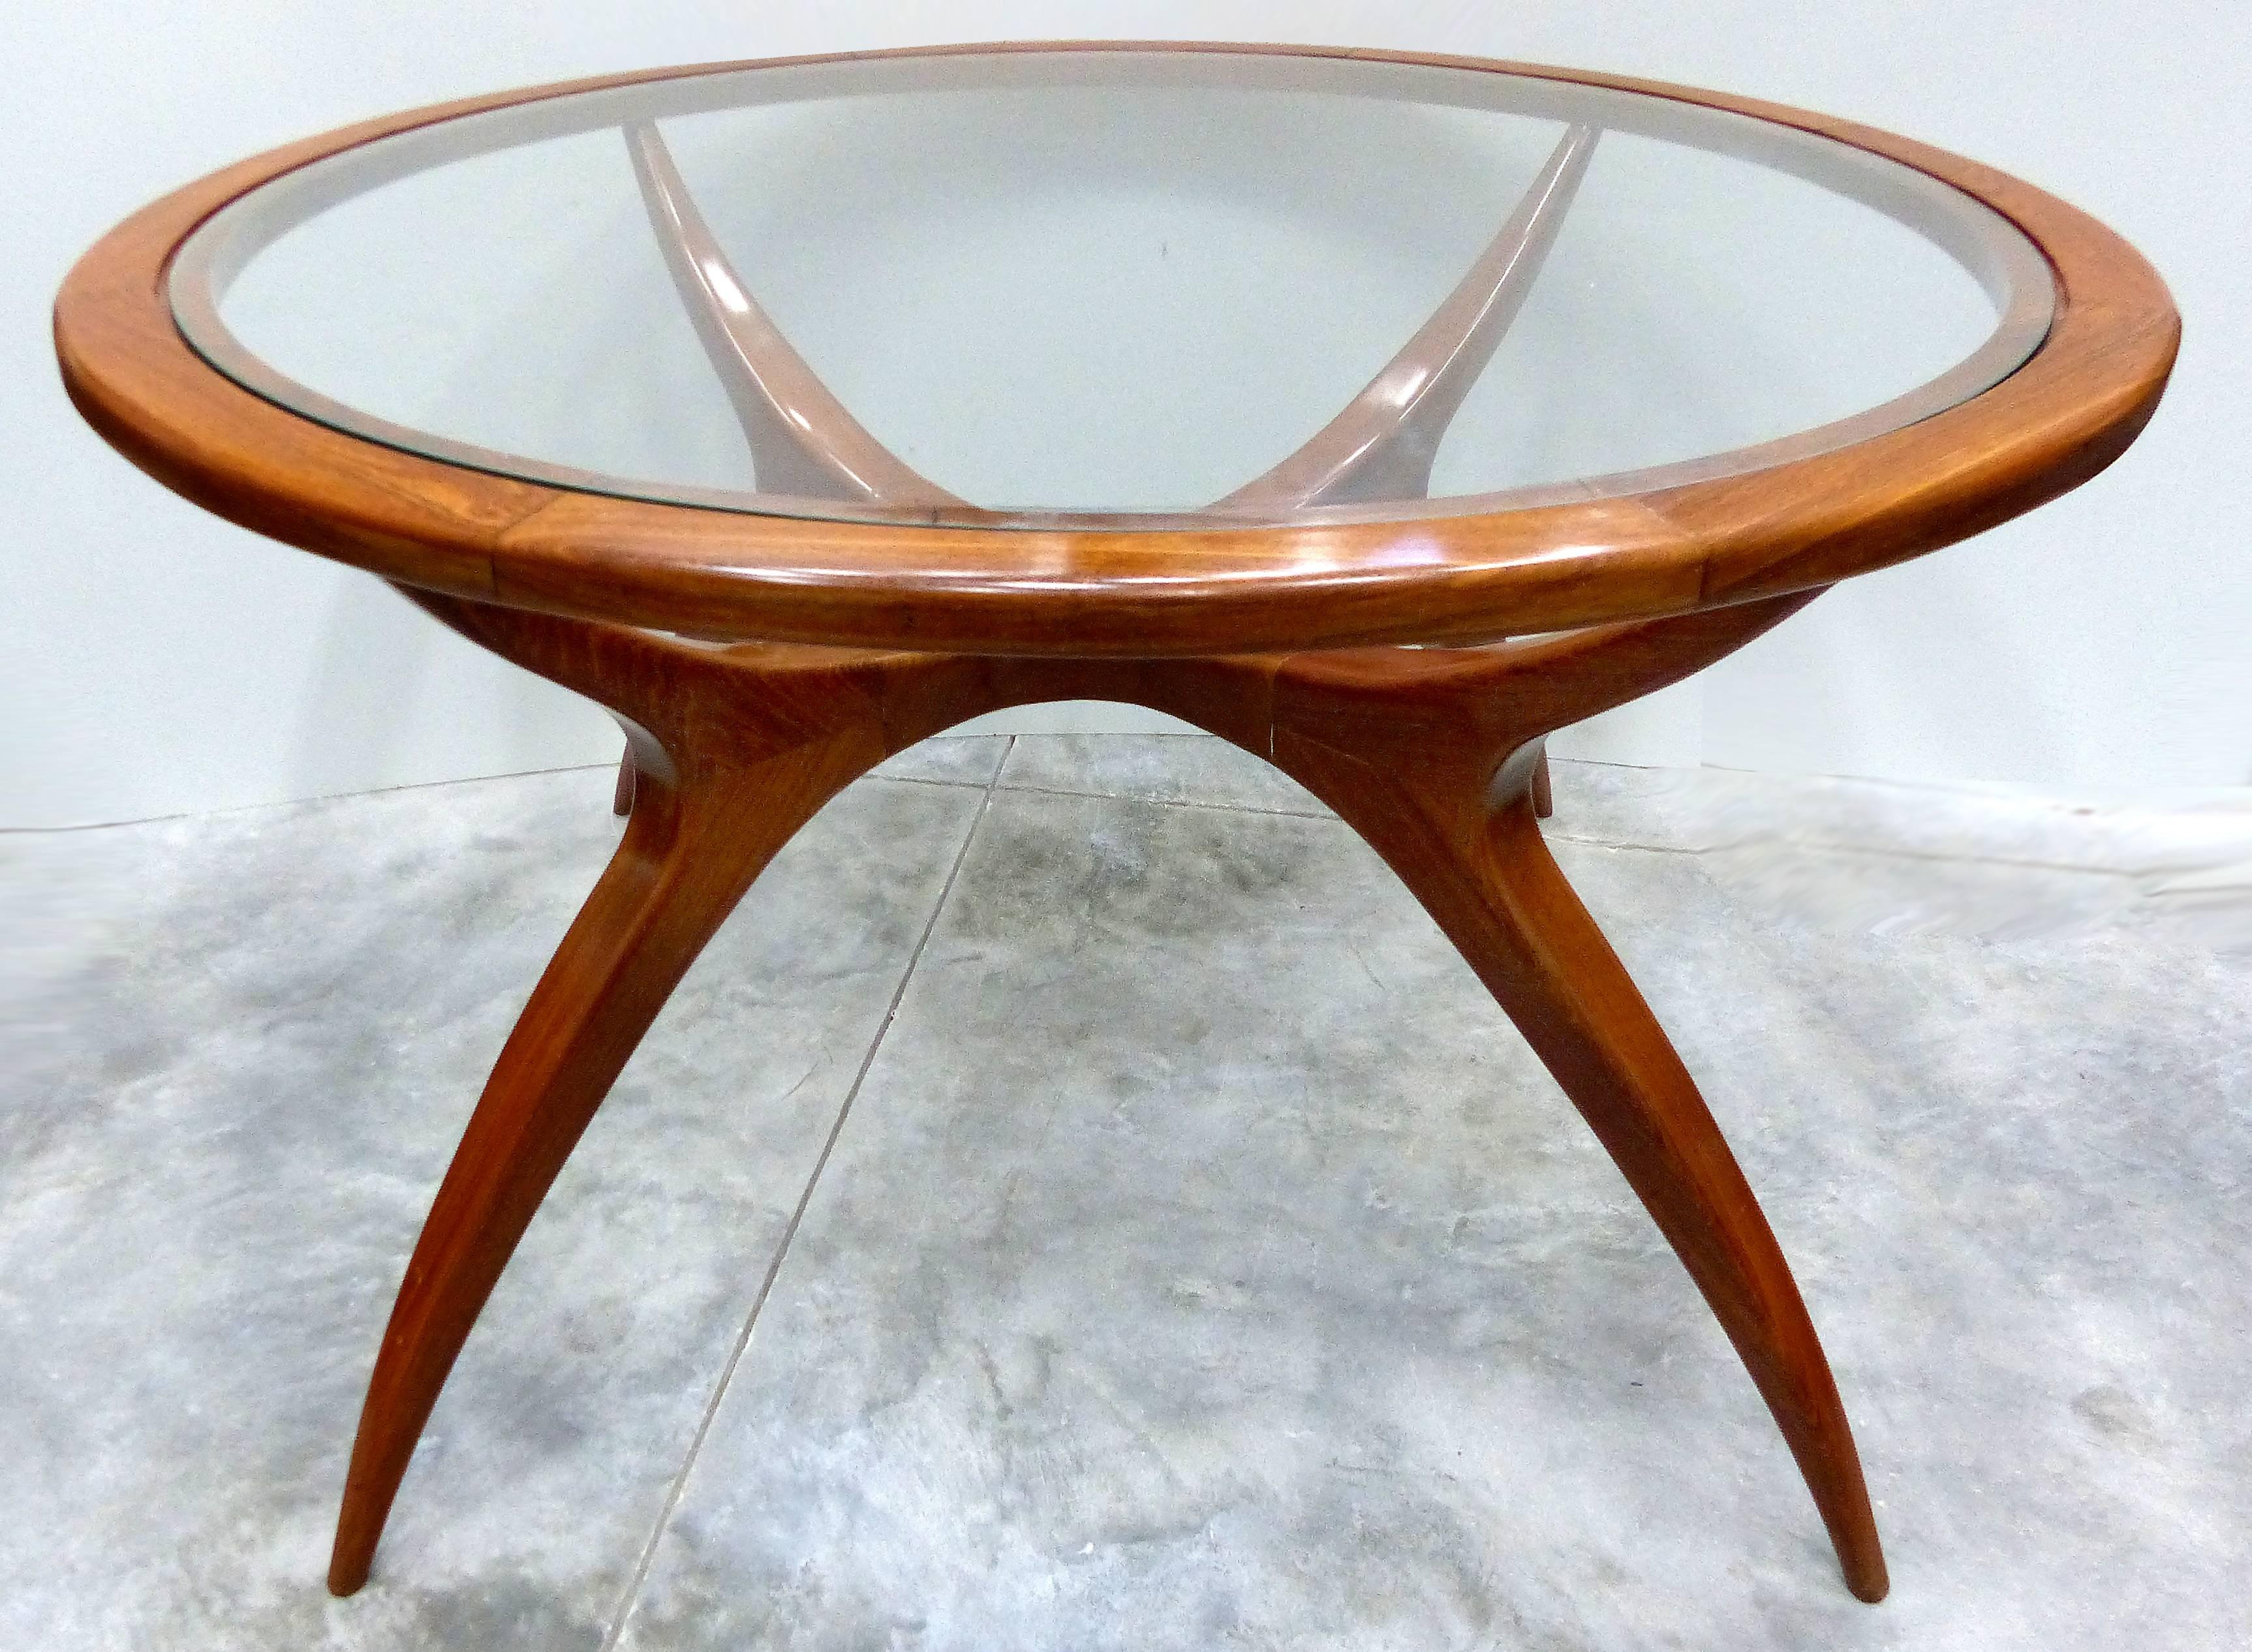 Brazilian Sculptural Wood Table by Giuseppe Scapinelli, Brazil, 1960s